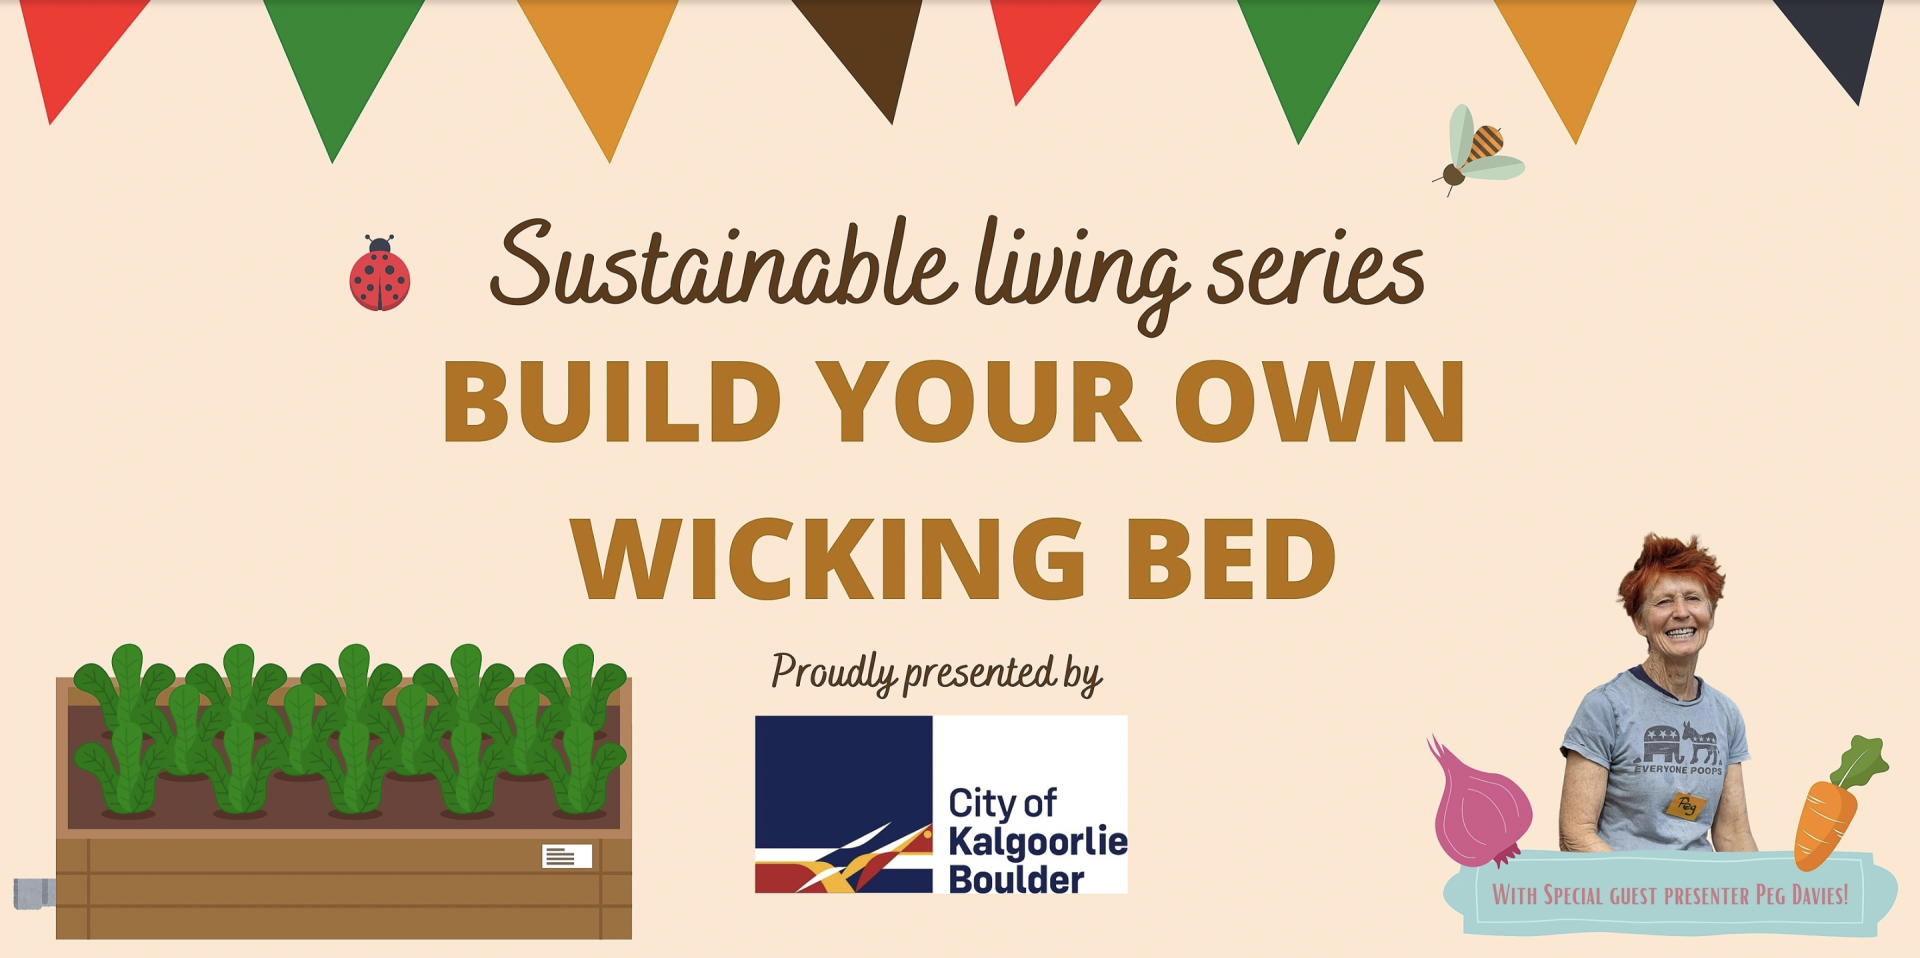 Waste Workshop - Build Your Own Wicking Bed